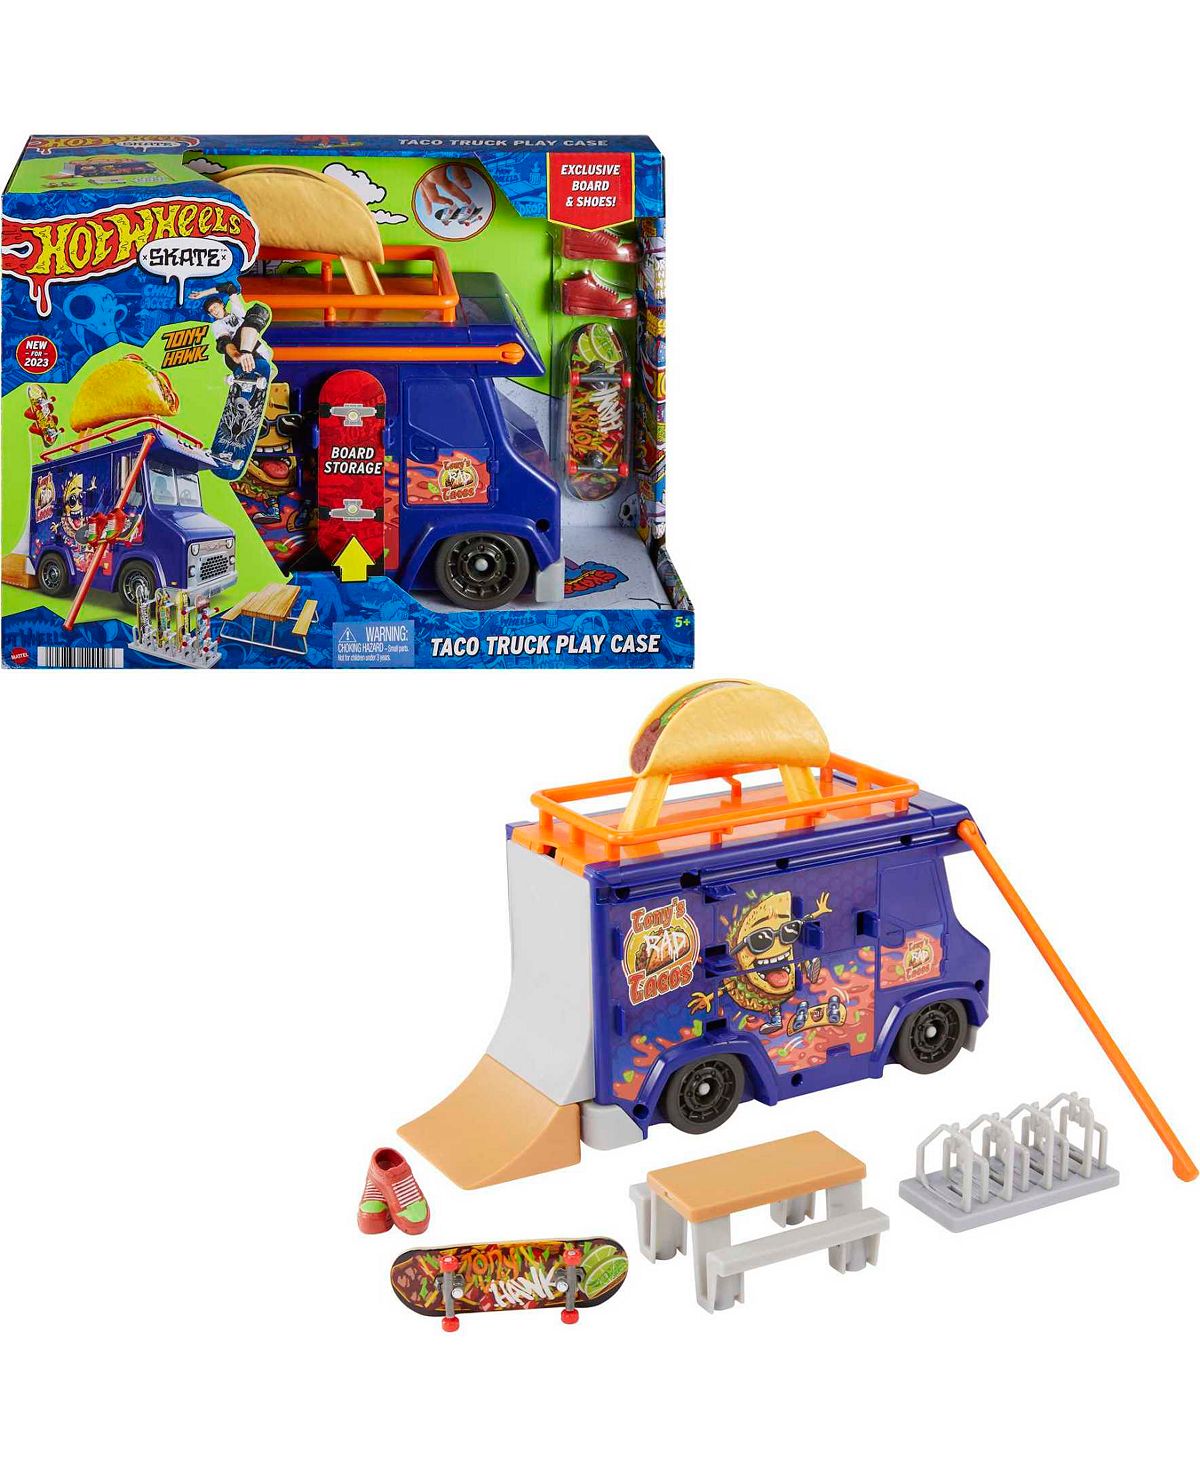 Hot Wheels Skate Taco Truck Play Case with Exclusive Fingerboard & Skate Shoes